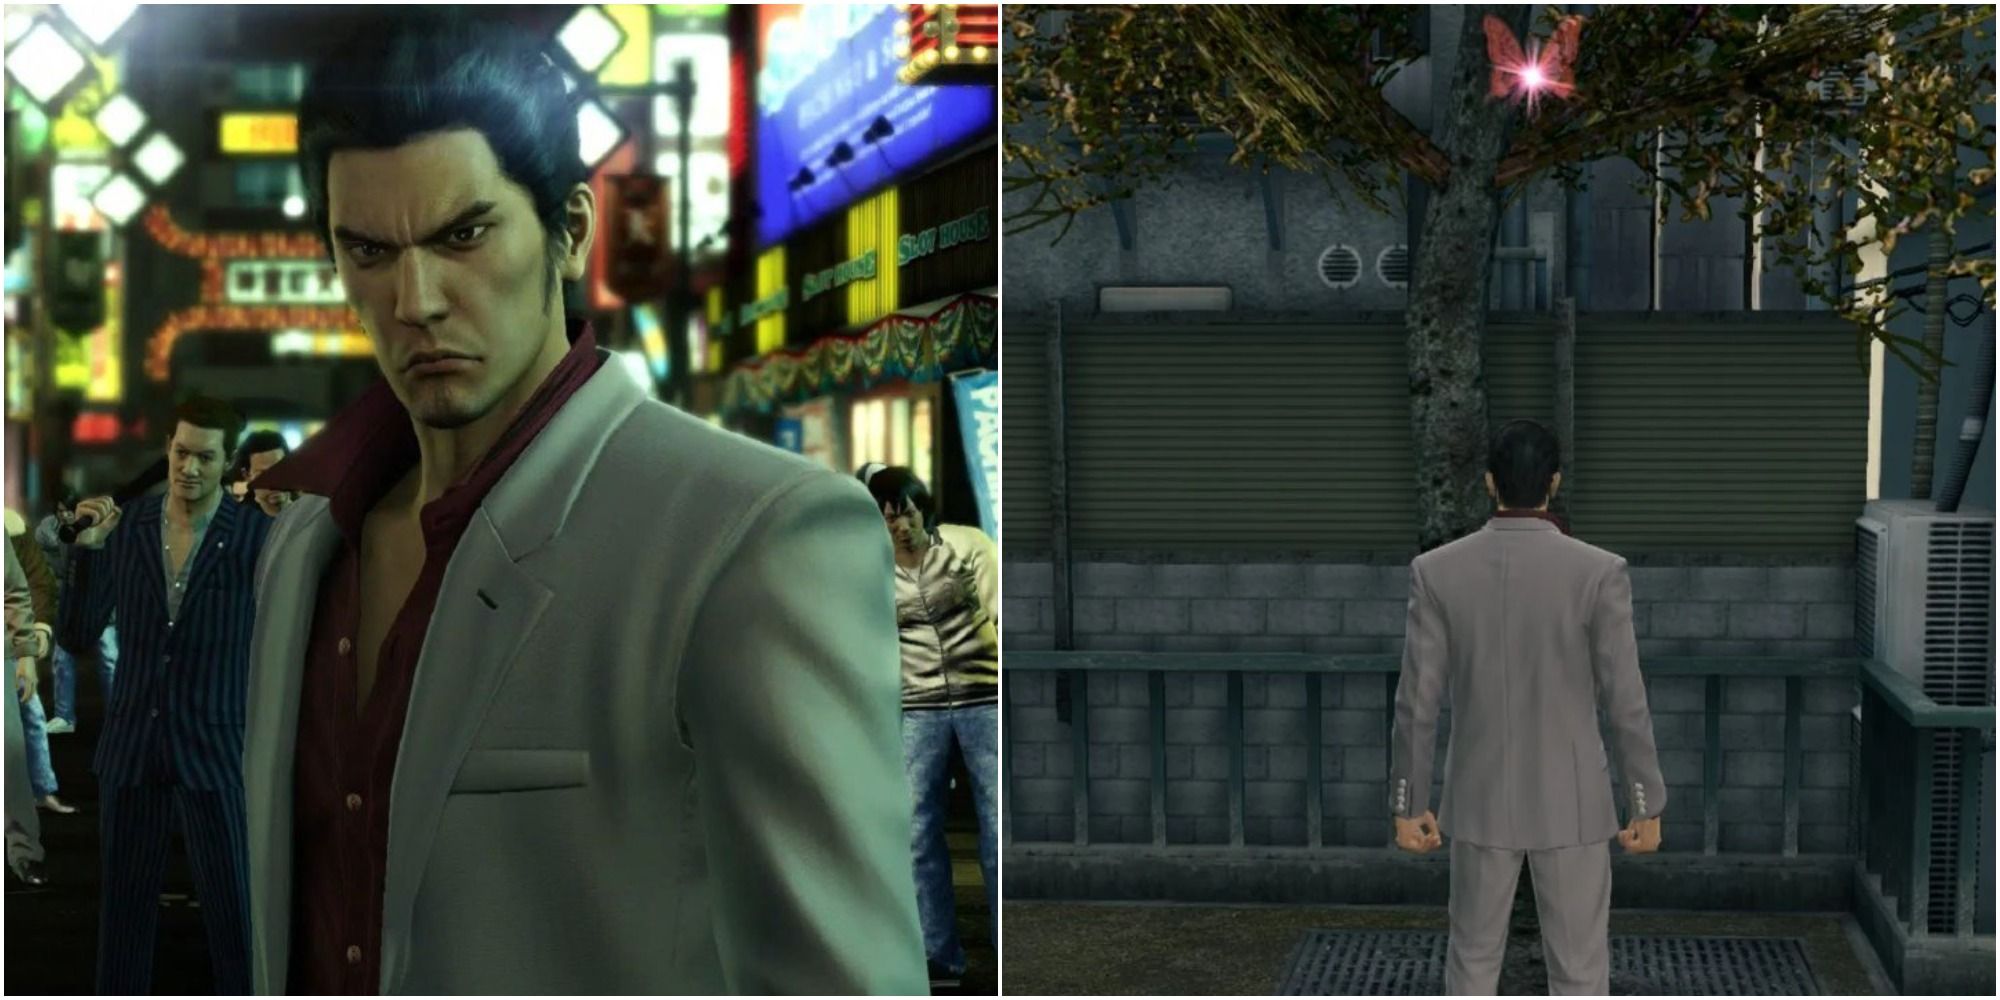 Kiryu on the left looking at the camera, while looking at a card on a tree on the right.